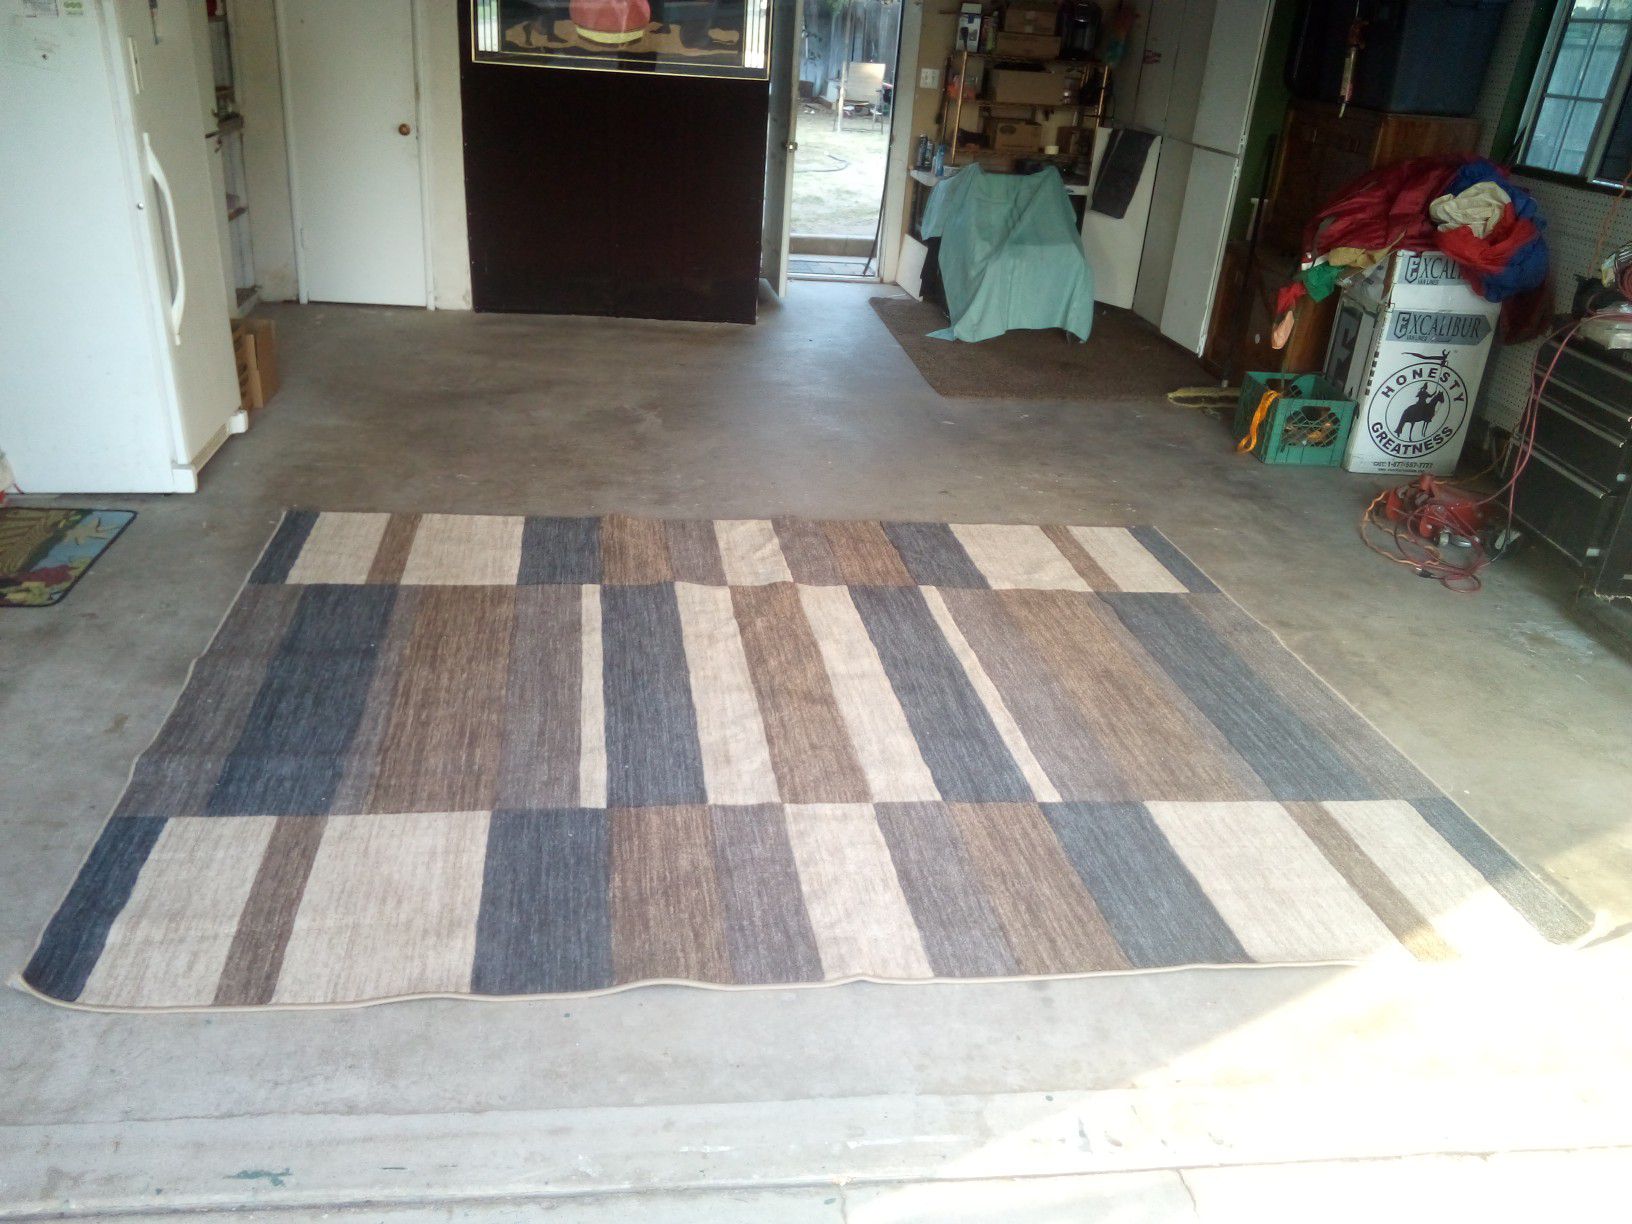 Modern 120x96 in. area rug. Great condition. Yes it is still available